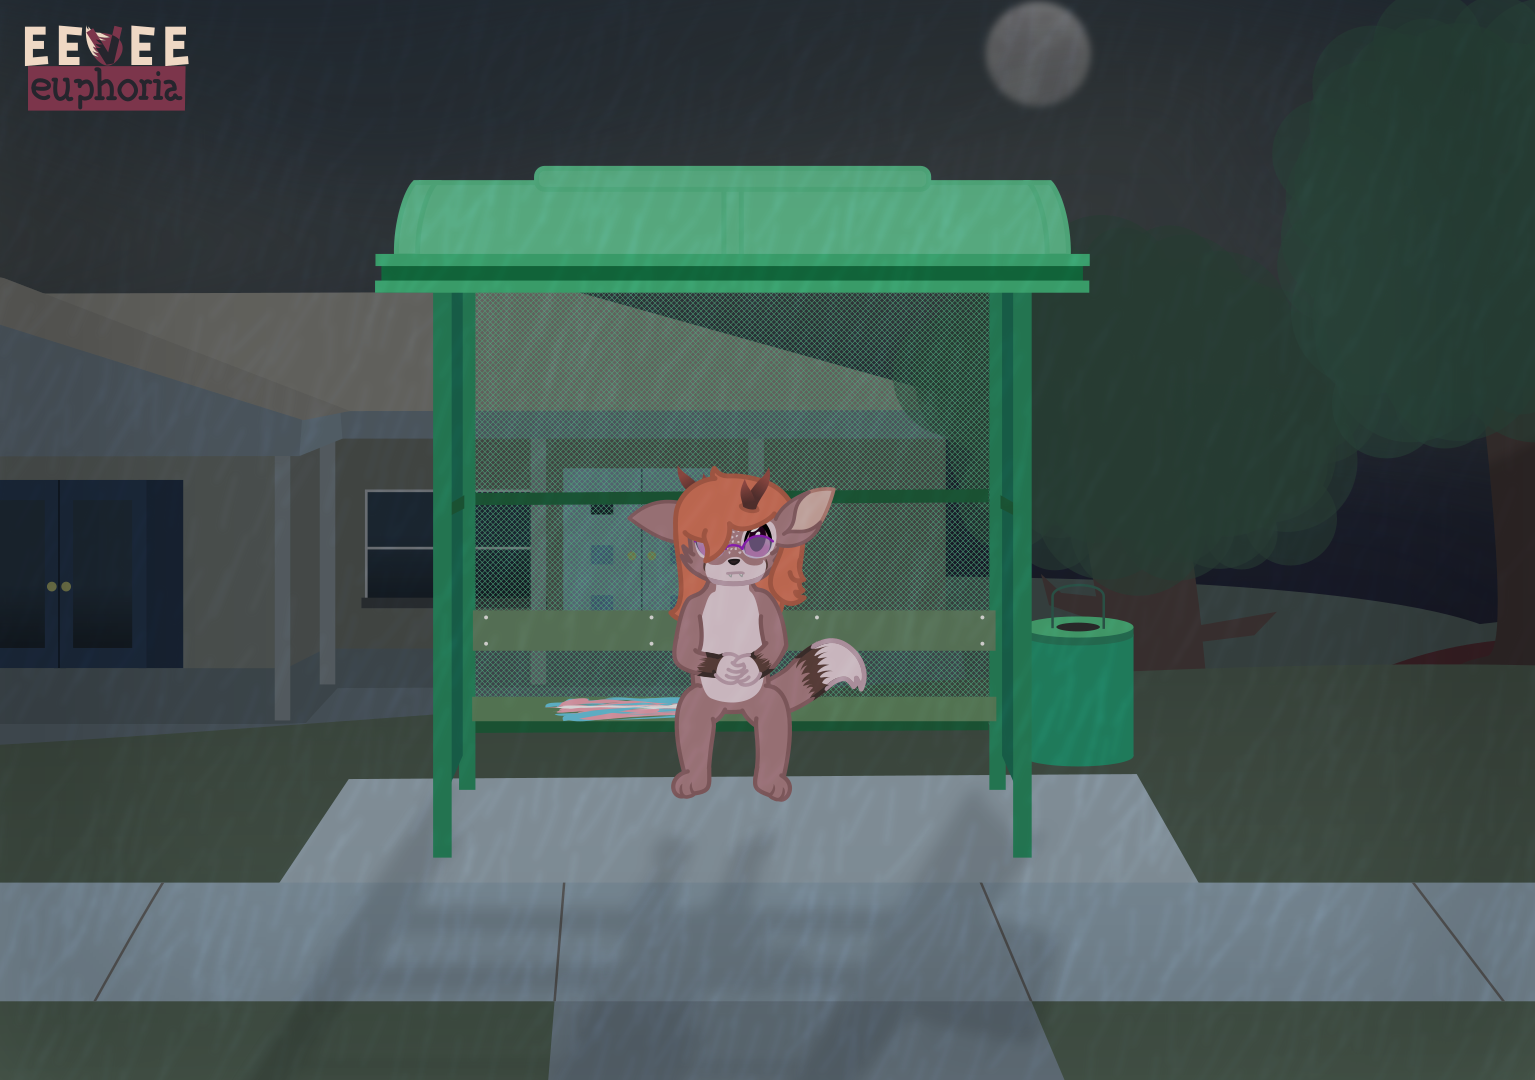 A deerfox is sitting on a bus-stop bench while it rains over head. Next to her is a torn up transgender pride flag.